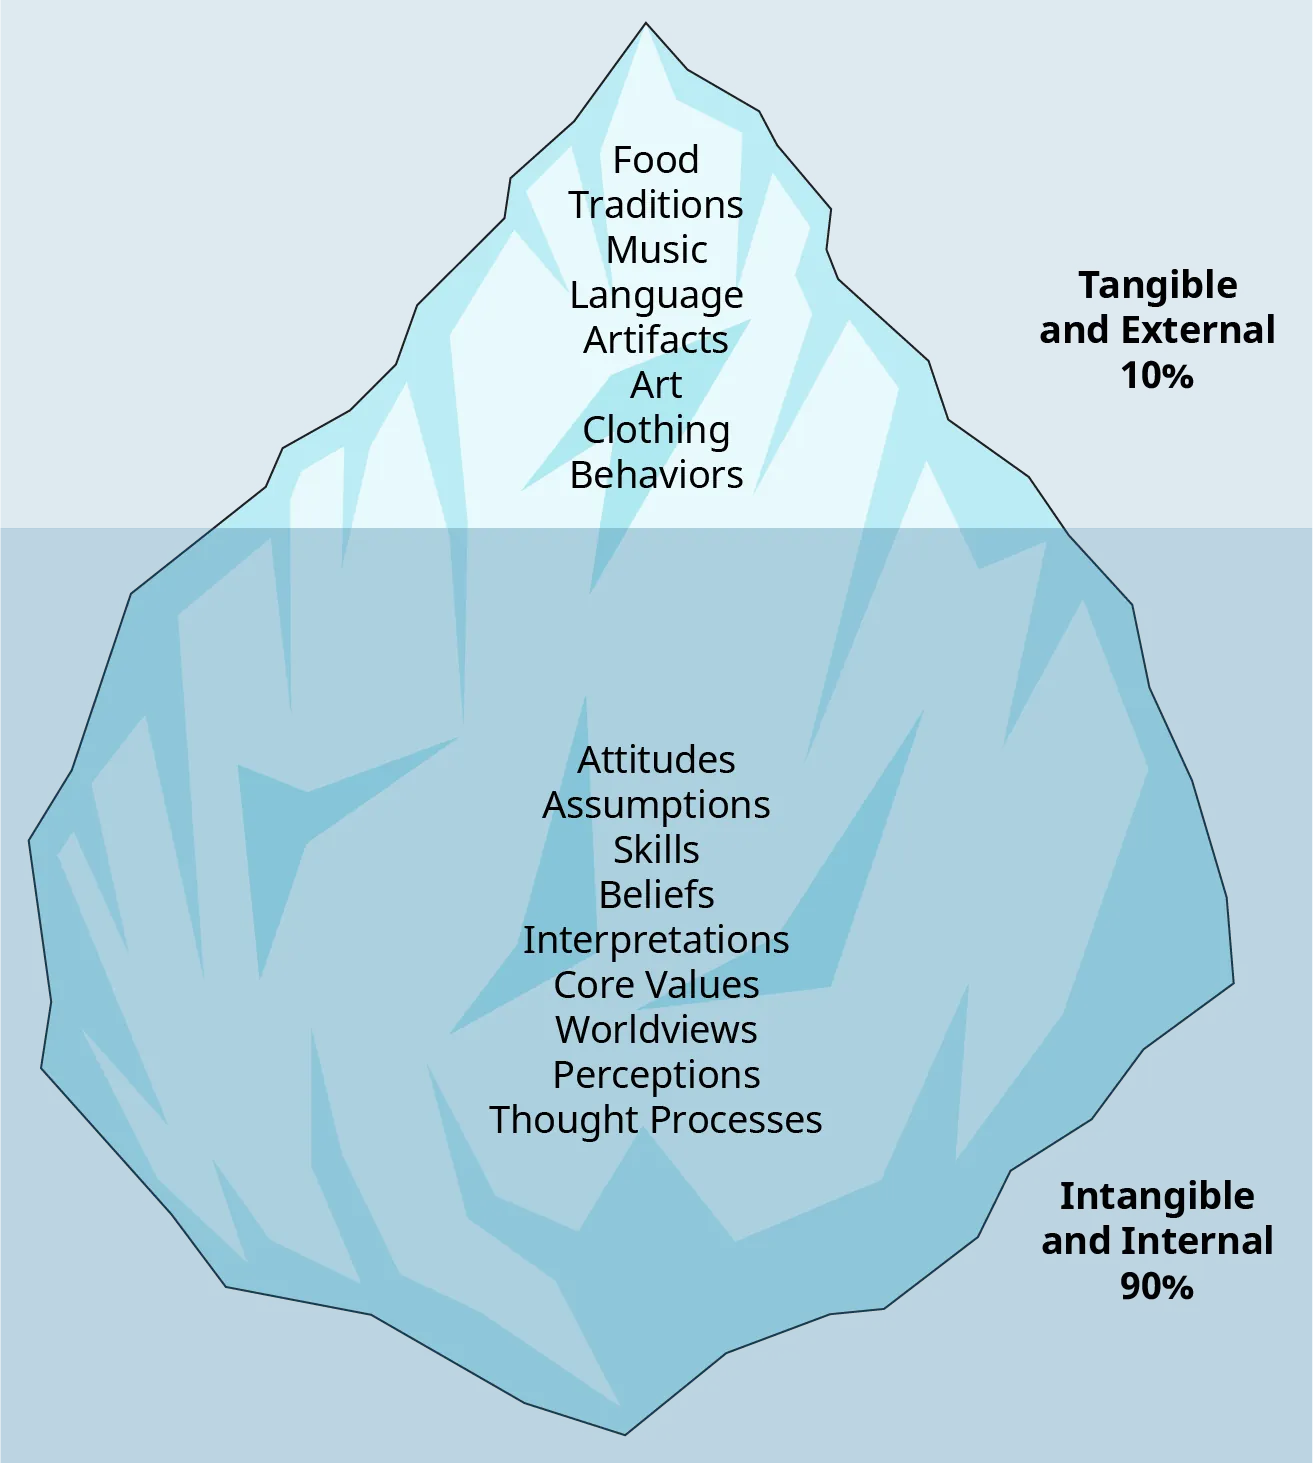 The aspects of culture are represented by an iceberg. Food, traditions, music, language, artifacts, art, clothing, and behaviors are the 10% of culture that is tangible and external. Attitudes, assumptions, skills, beliefs, interpretations, core values, world views, perceptions, and thought processes are the 90% of culture that is intangible and internal.